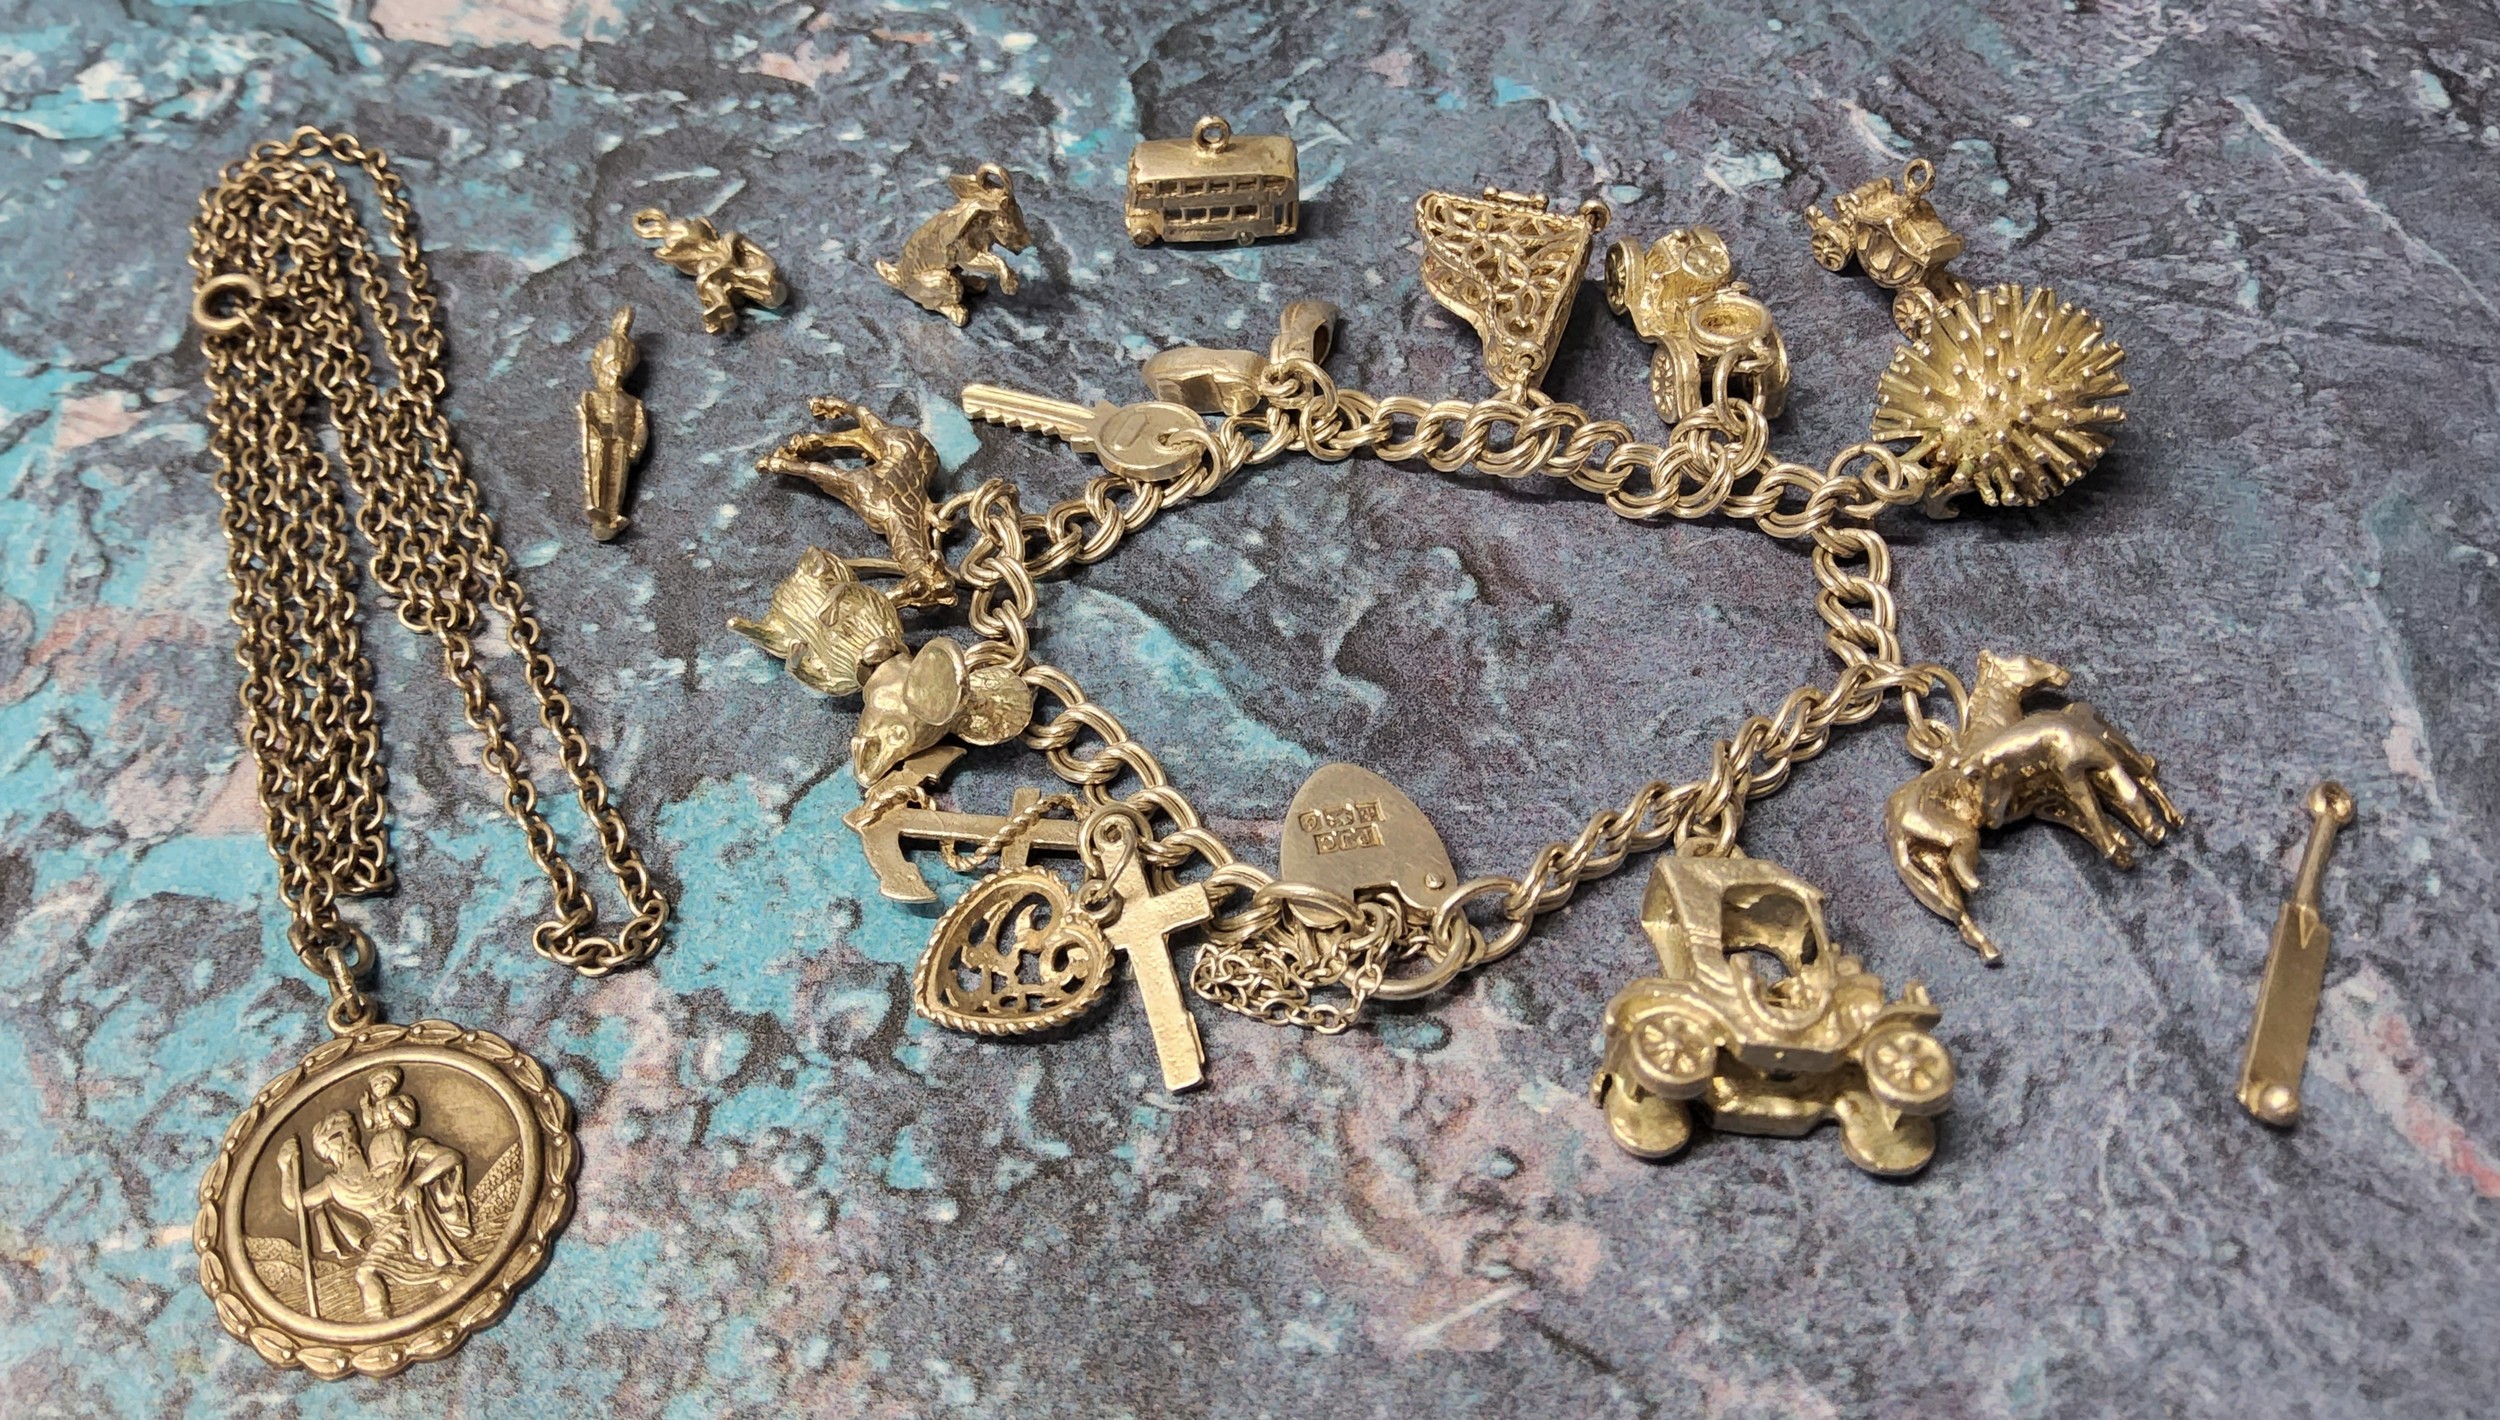 A silver charm bracelet holding 10 charms including a horse & foal, grand piano, mouse etc. other